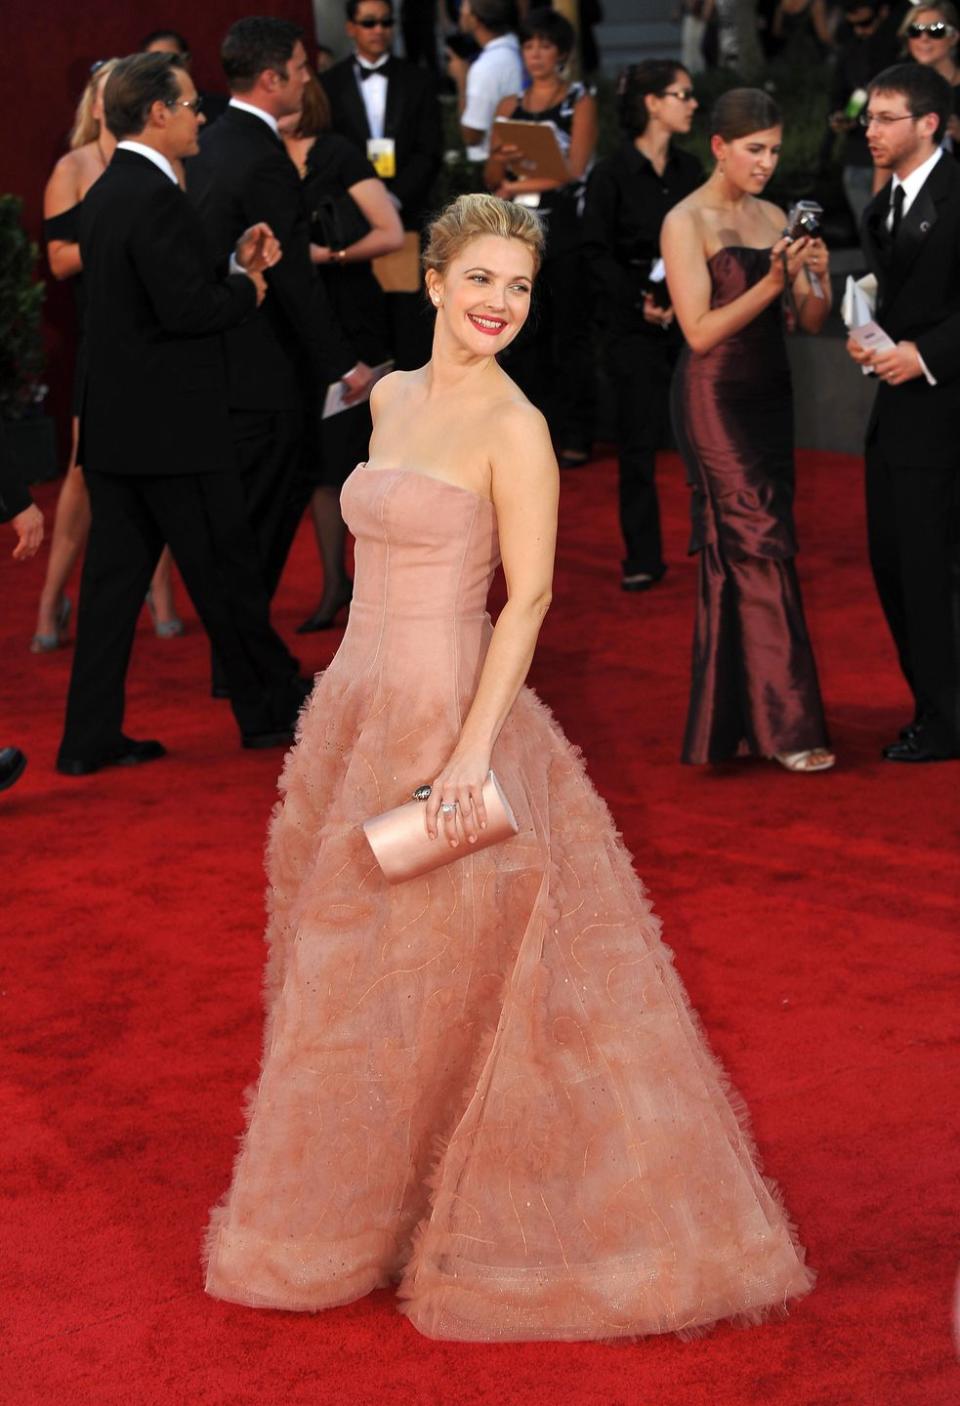 actress drew barrymore arrives on the re